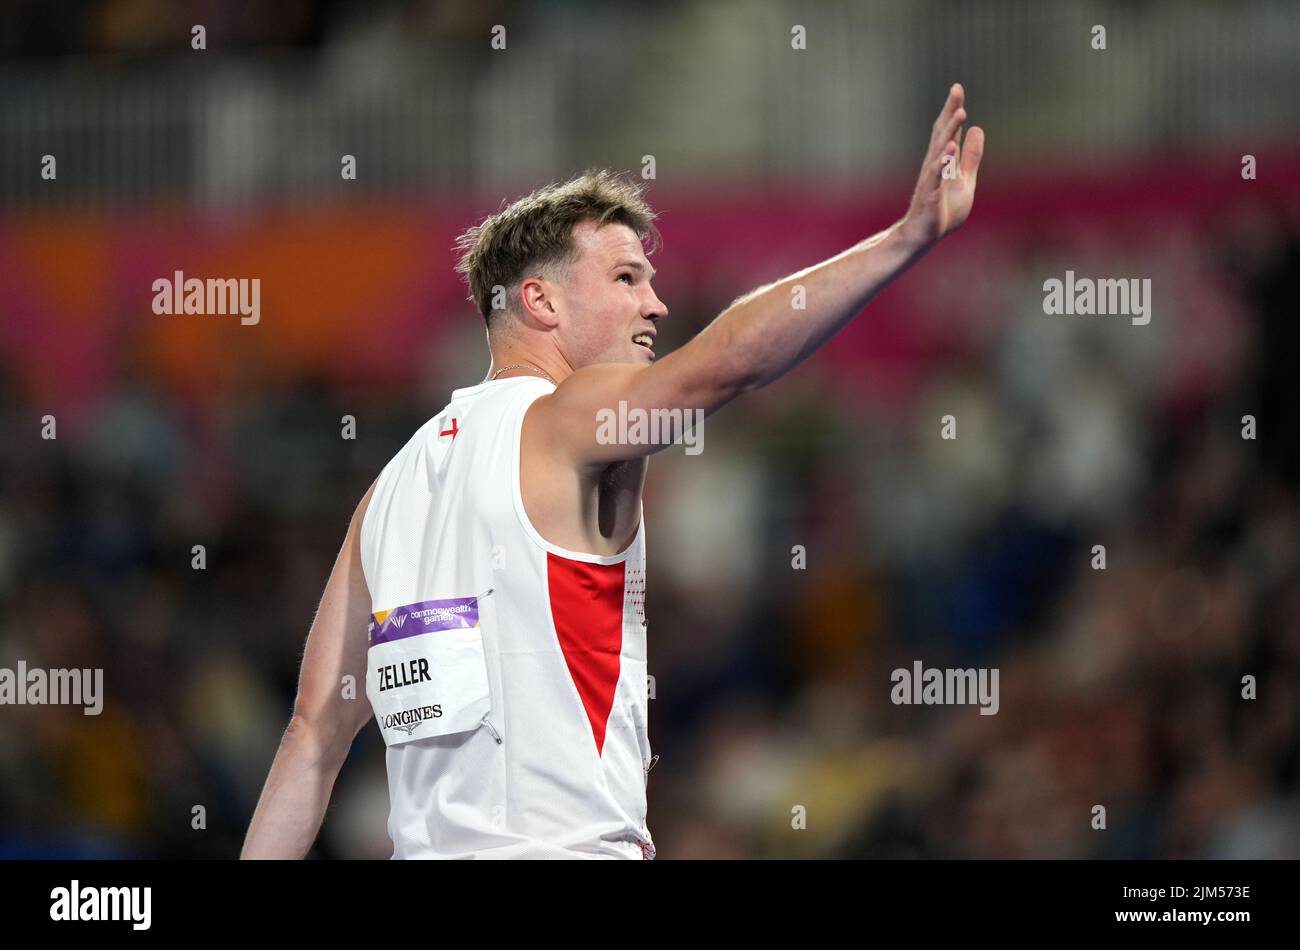 England's Joshua Zeller after the Men's 110m Hurdles Final at Alexander Stadium on day seven of the 2022 Commonwealth Games in Birmingham. Picture date: Thursday August 4, 2022. Stock Photo